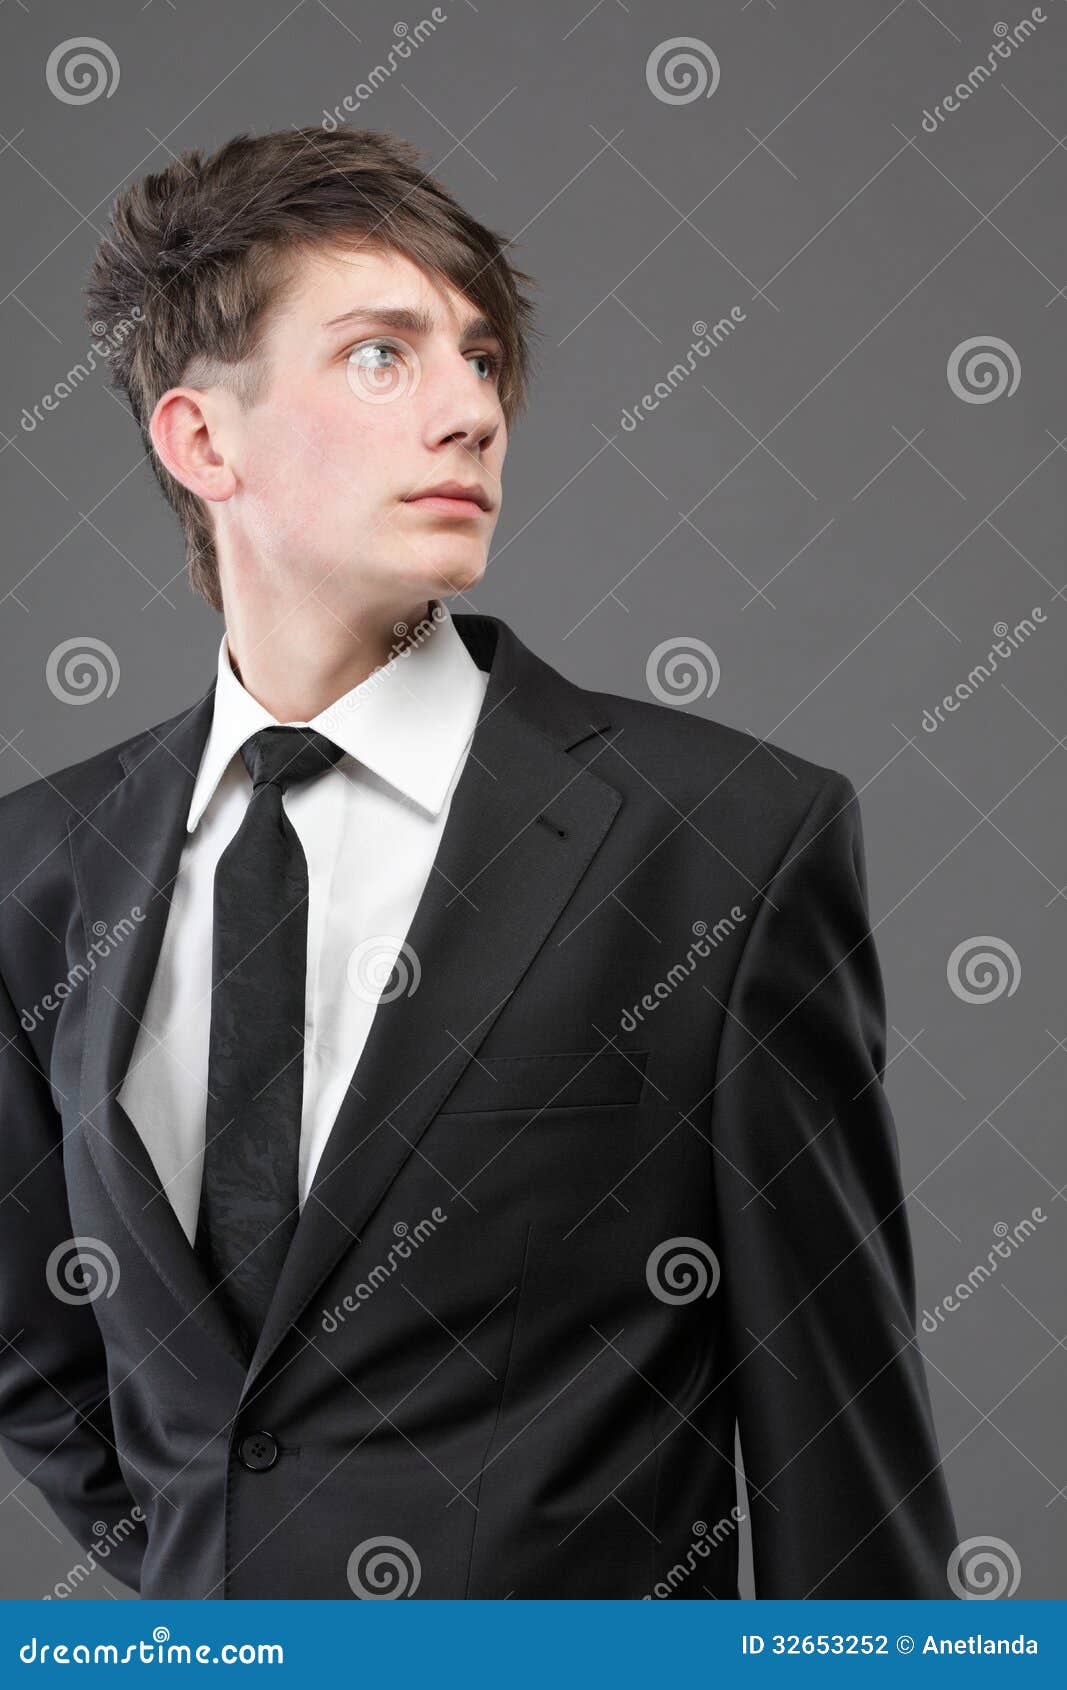 Young Businessman Black Suit Casual Tie On Gray Background Stock